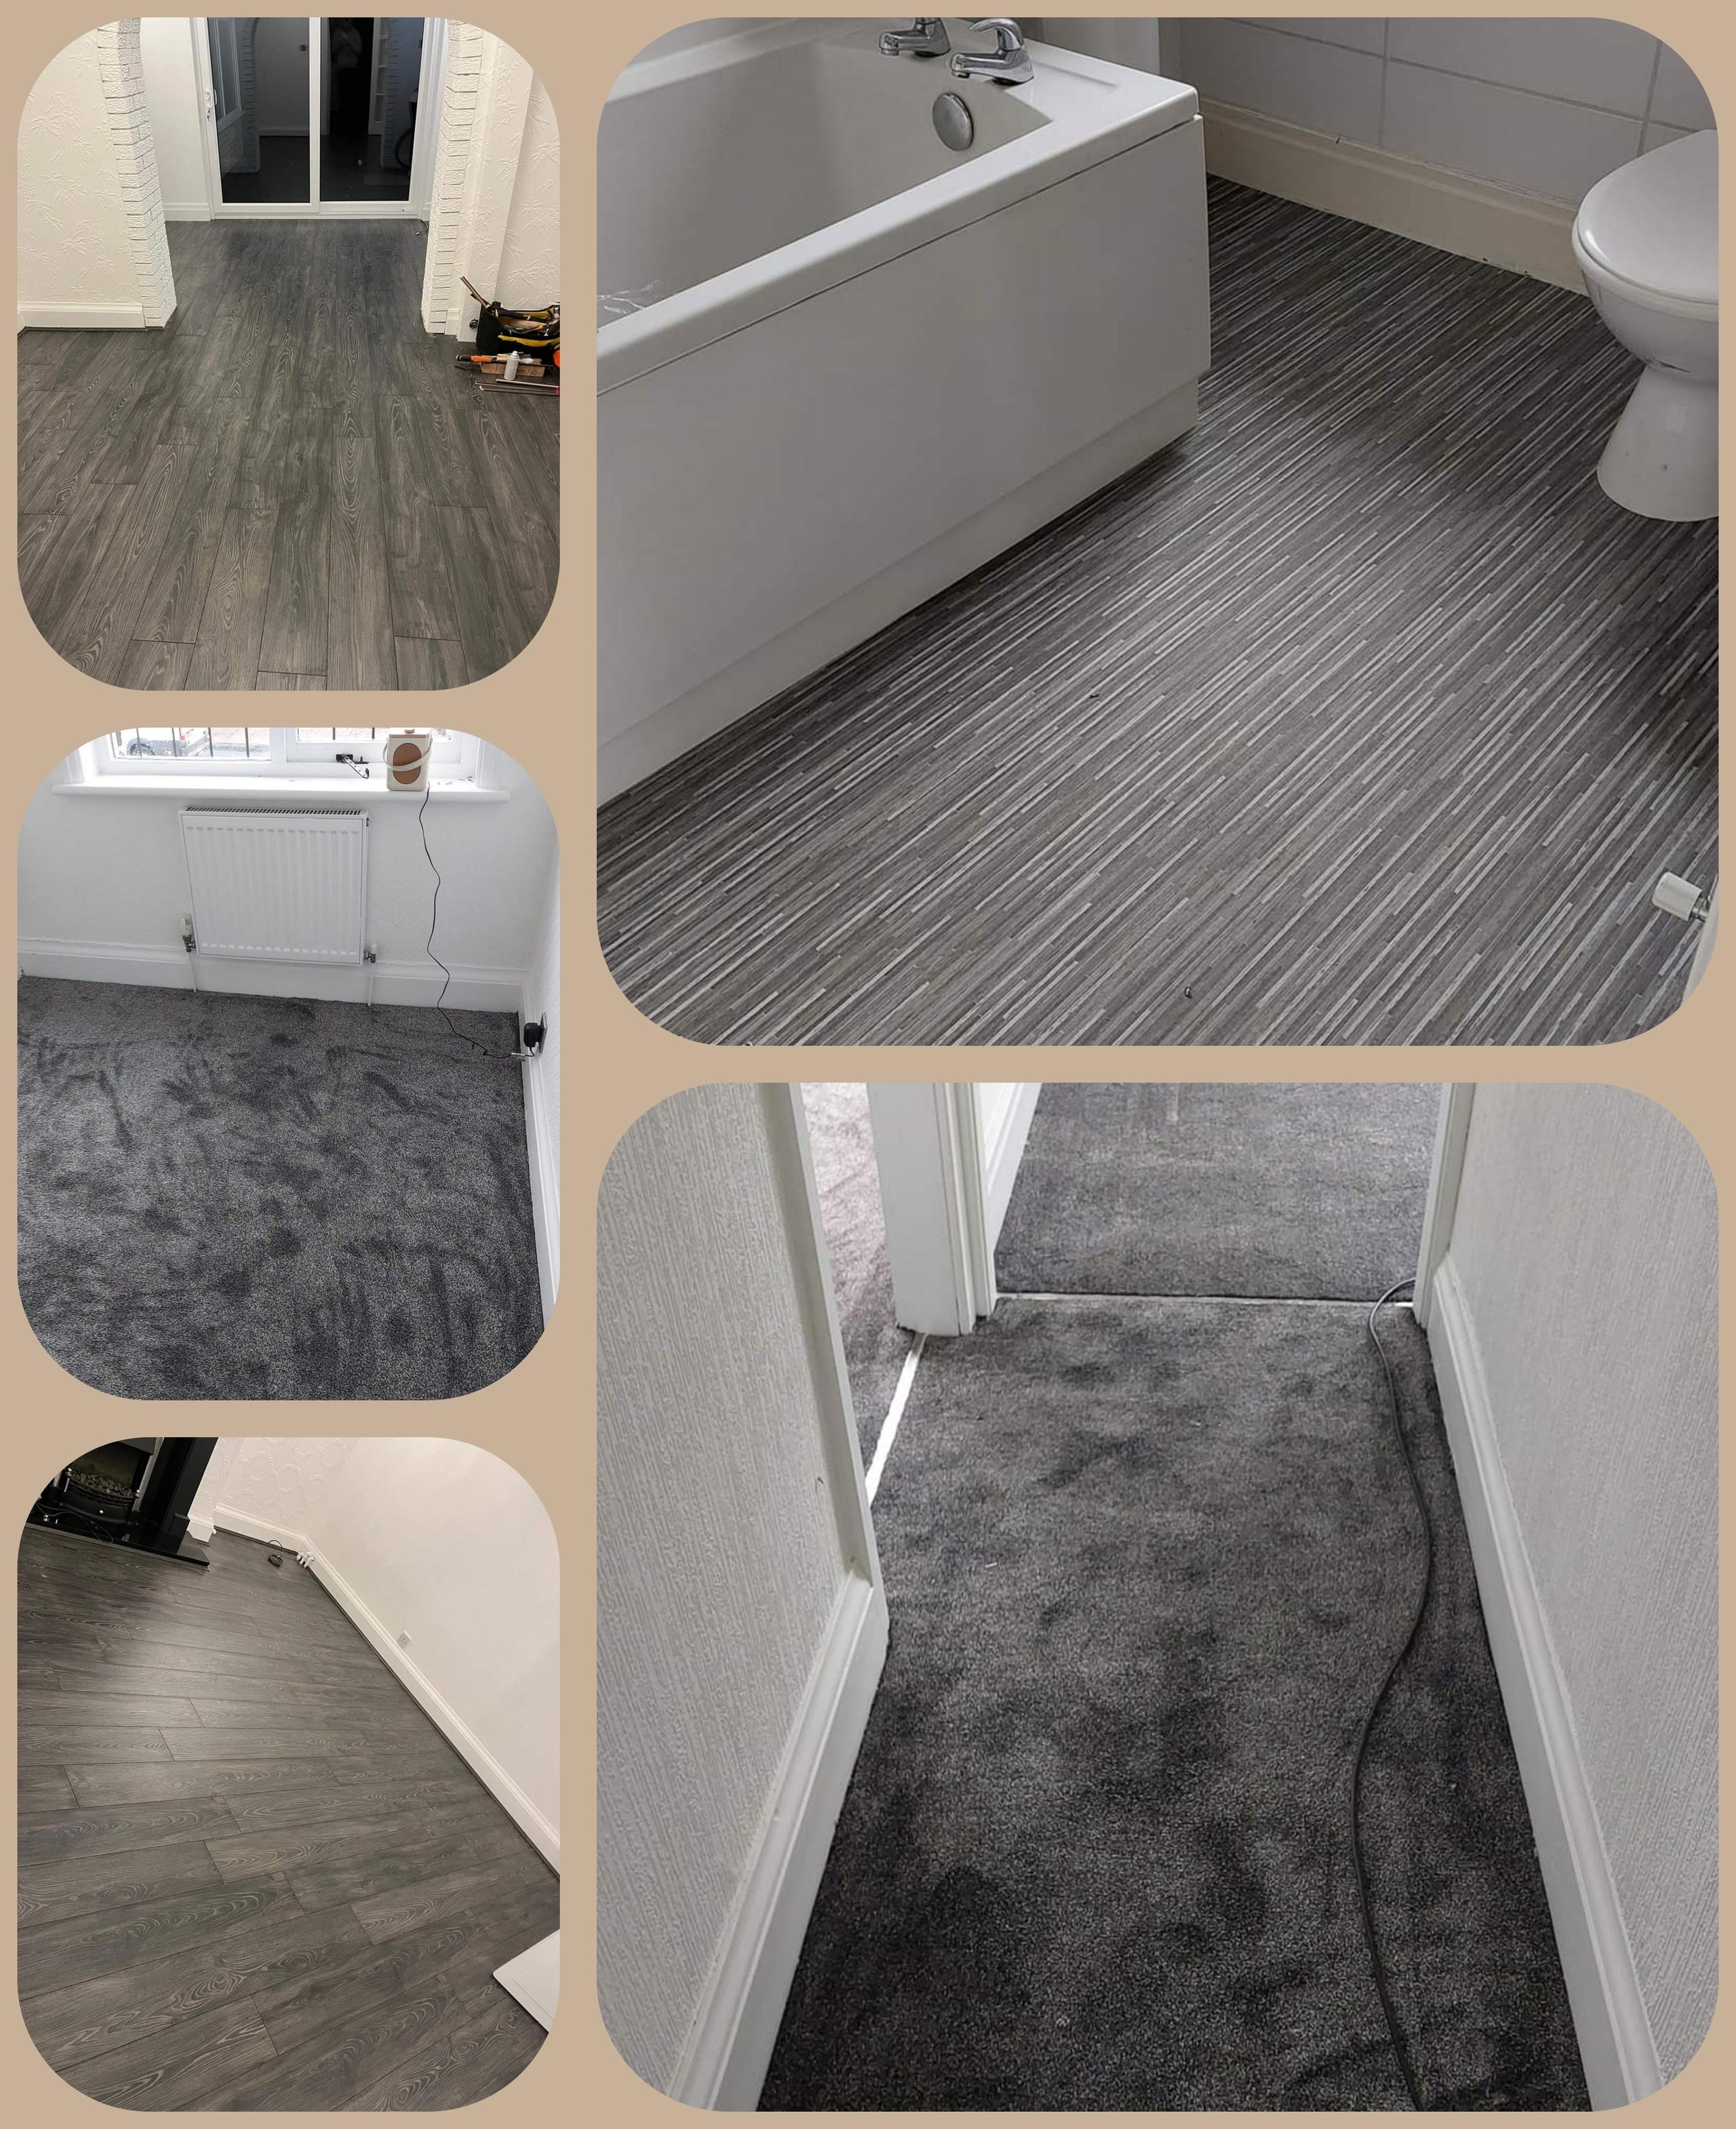 At Bridge Flooring of Leyland we are here for all your flooring needs and we cover Lancashire.